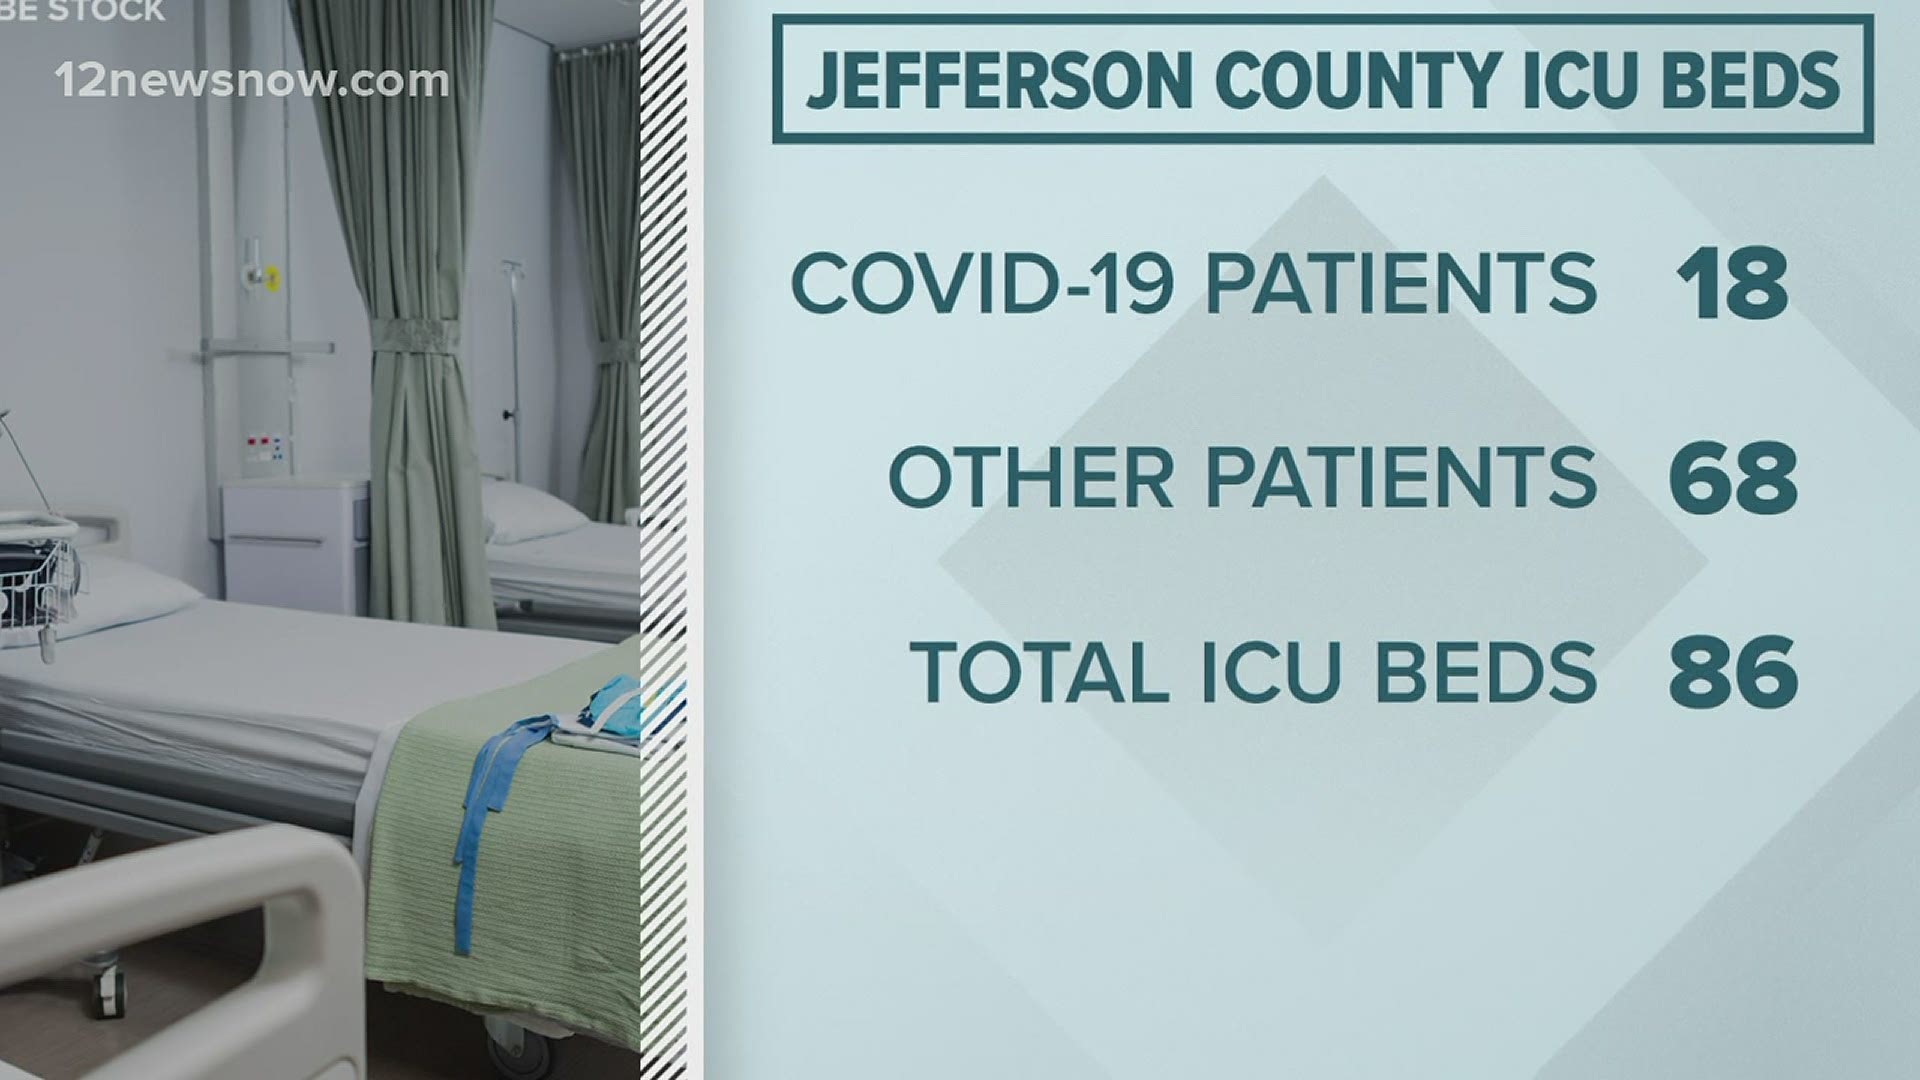 Jefferson County Judge Jeff Branick said now is a critical time and our hospital systems must implement their back-up plan.